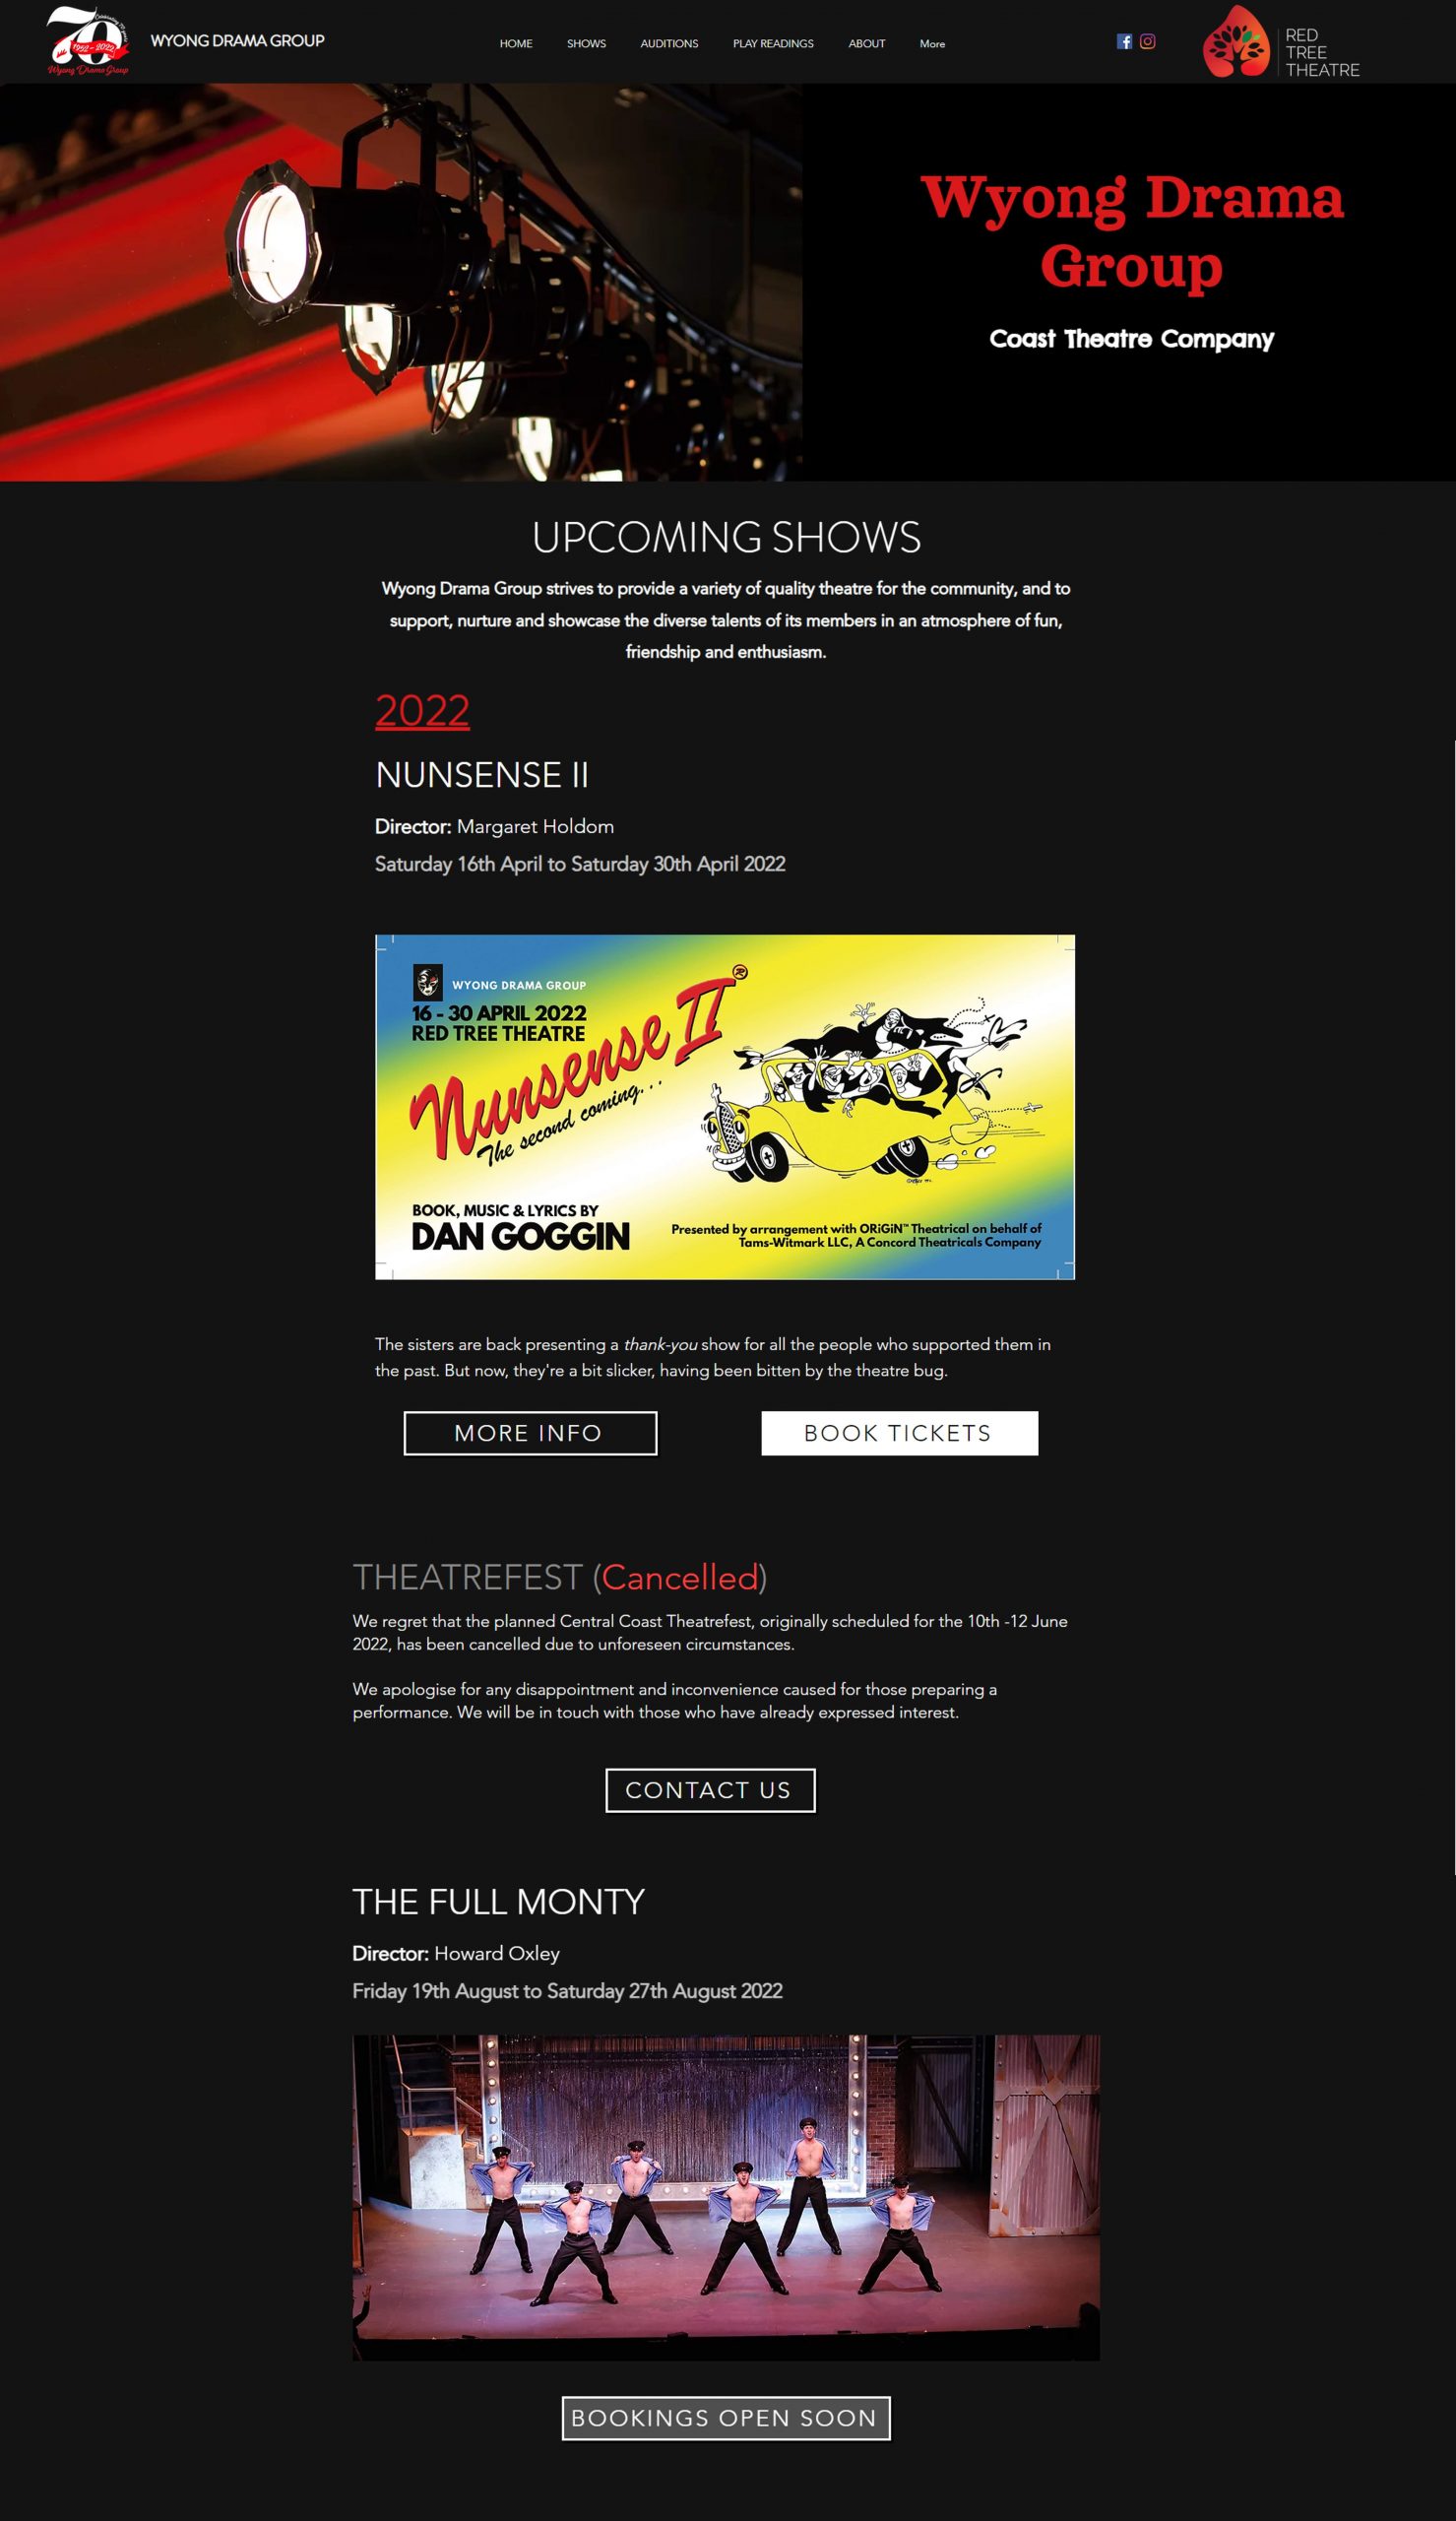 Website SEO and Redesign for the Wyong Drama Group